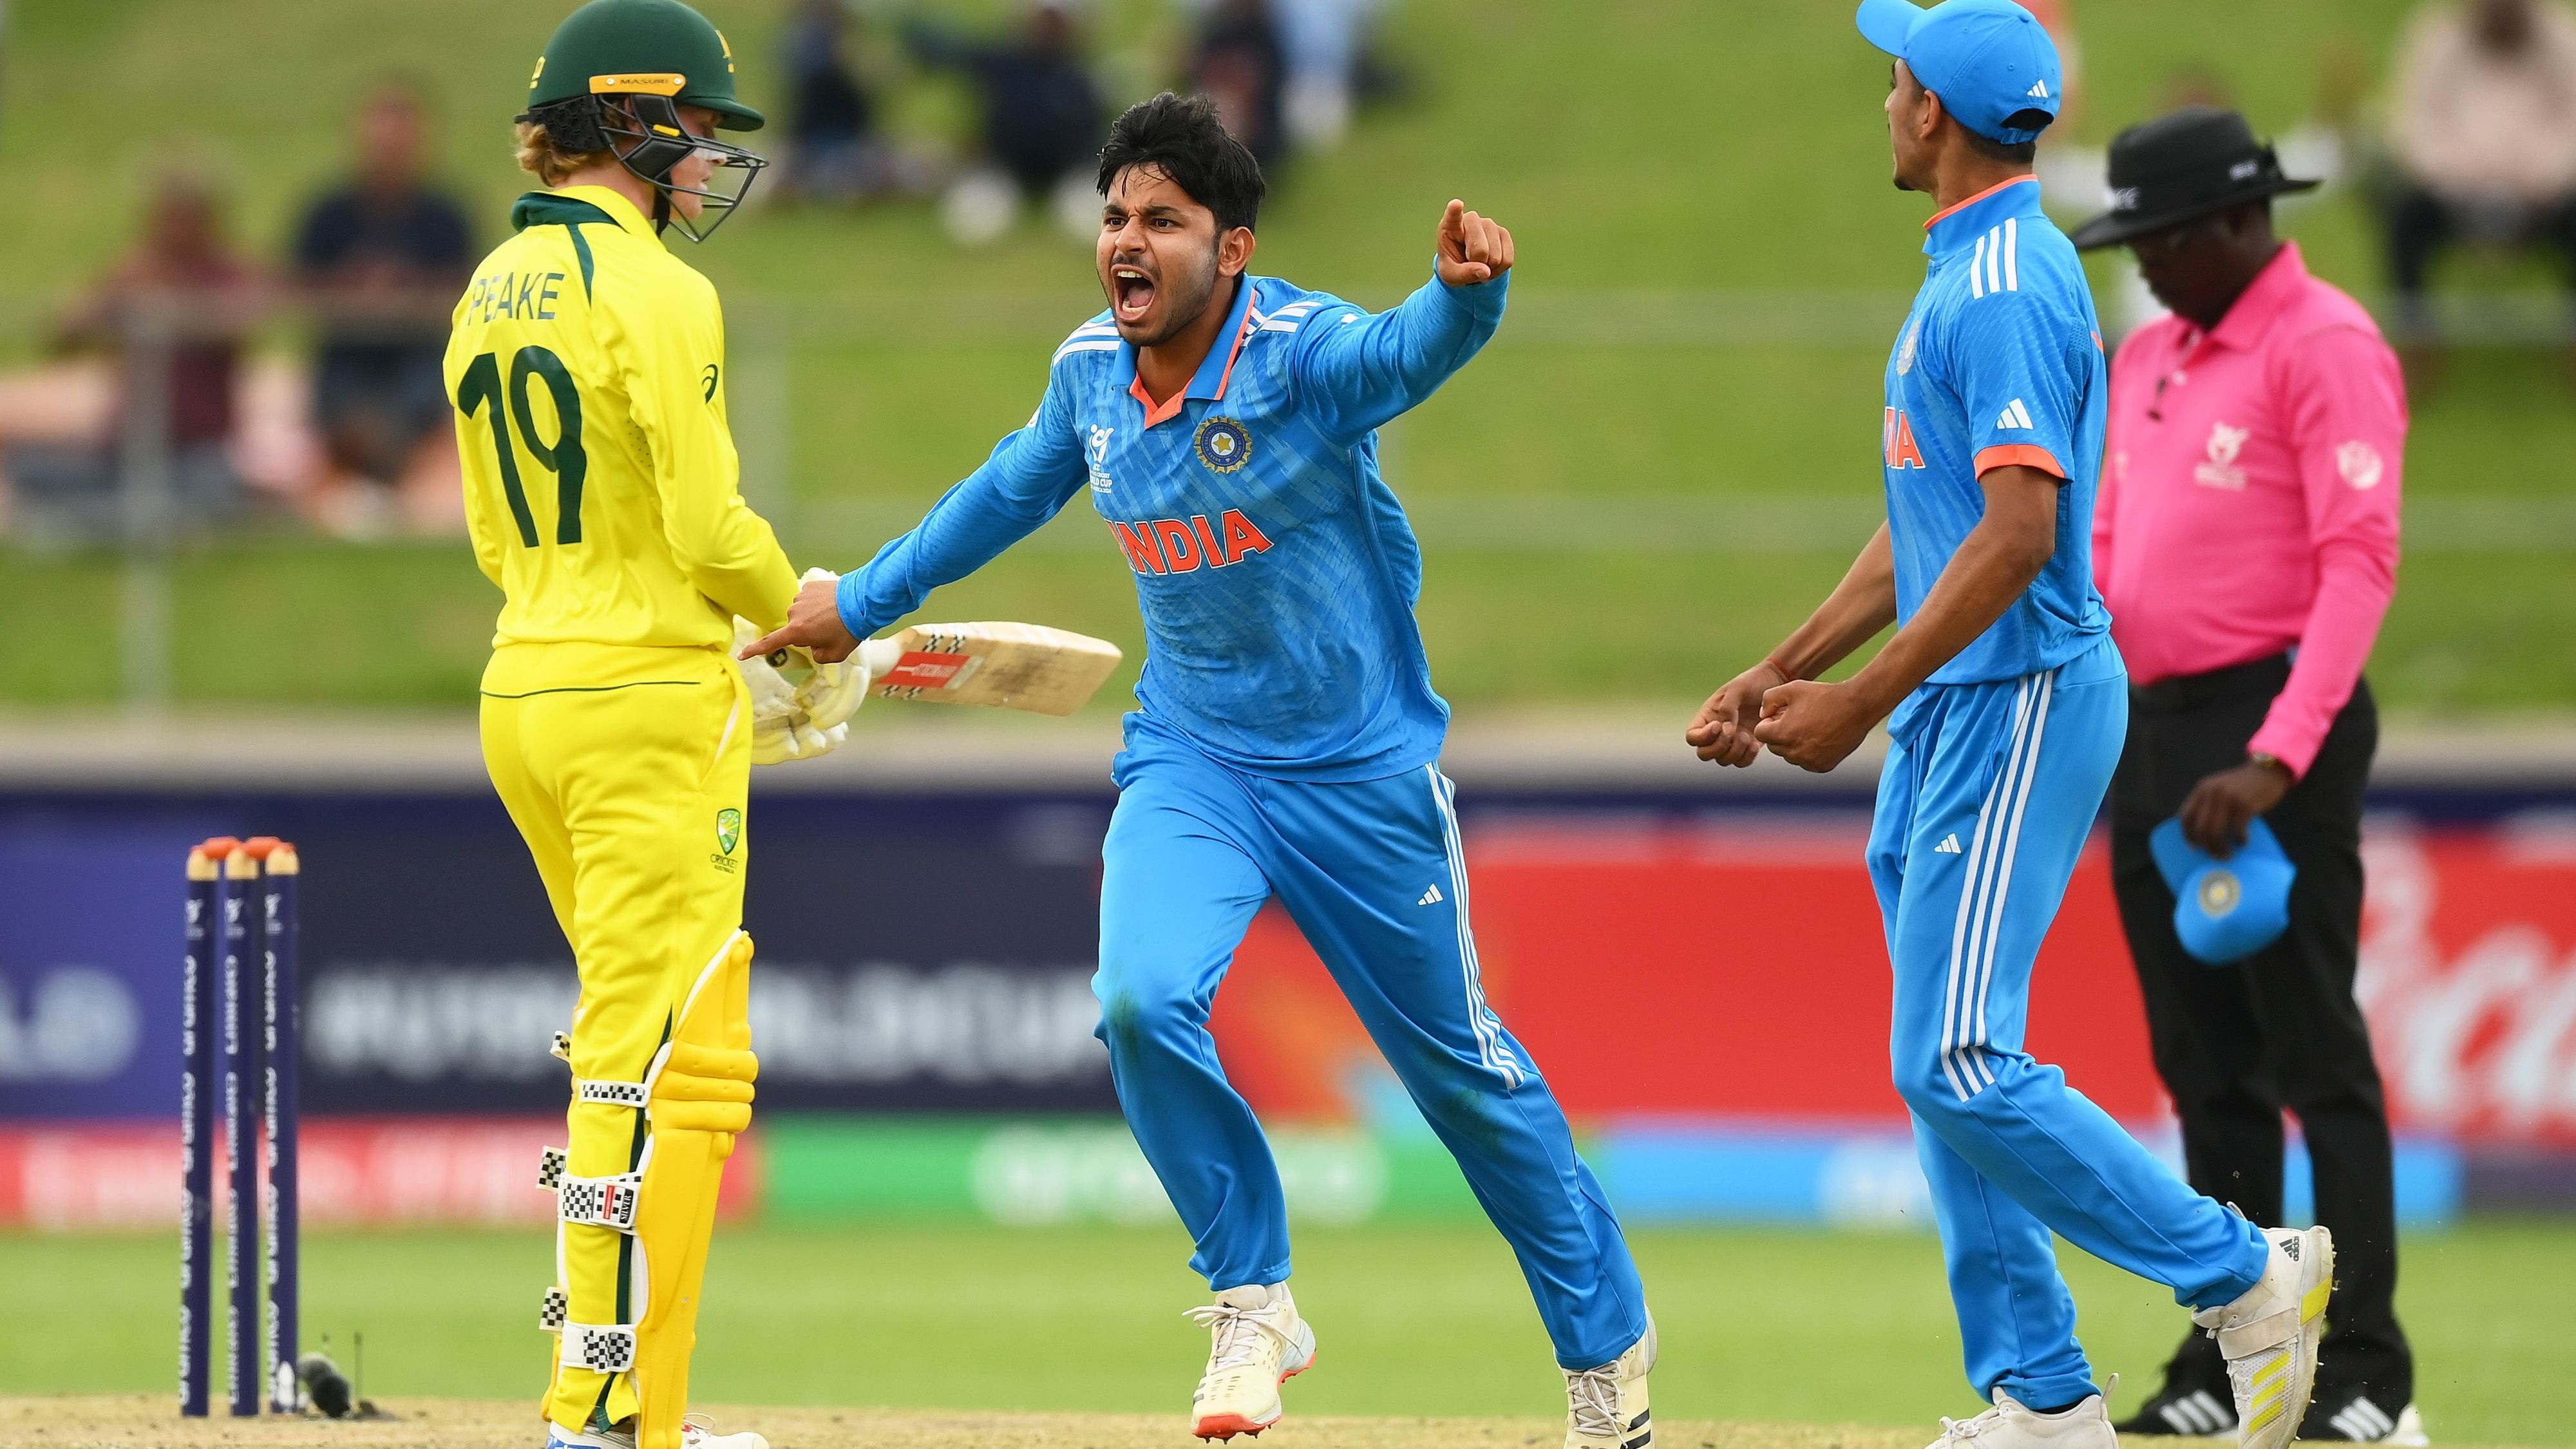 Saumy Kumar Pandey Of India Celebrates The Wicket Of Harjas Singh Of Australia During The Icc U19 Me